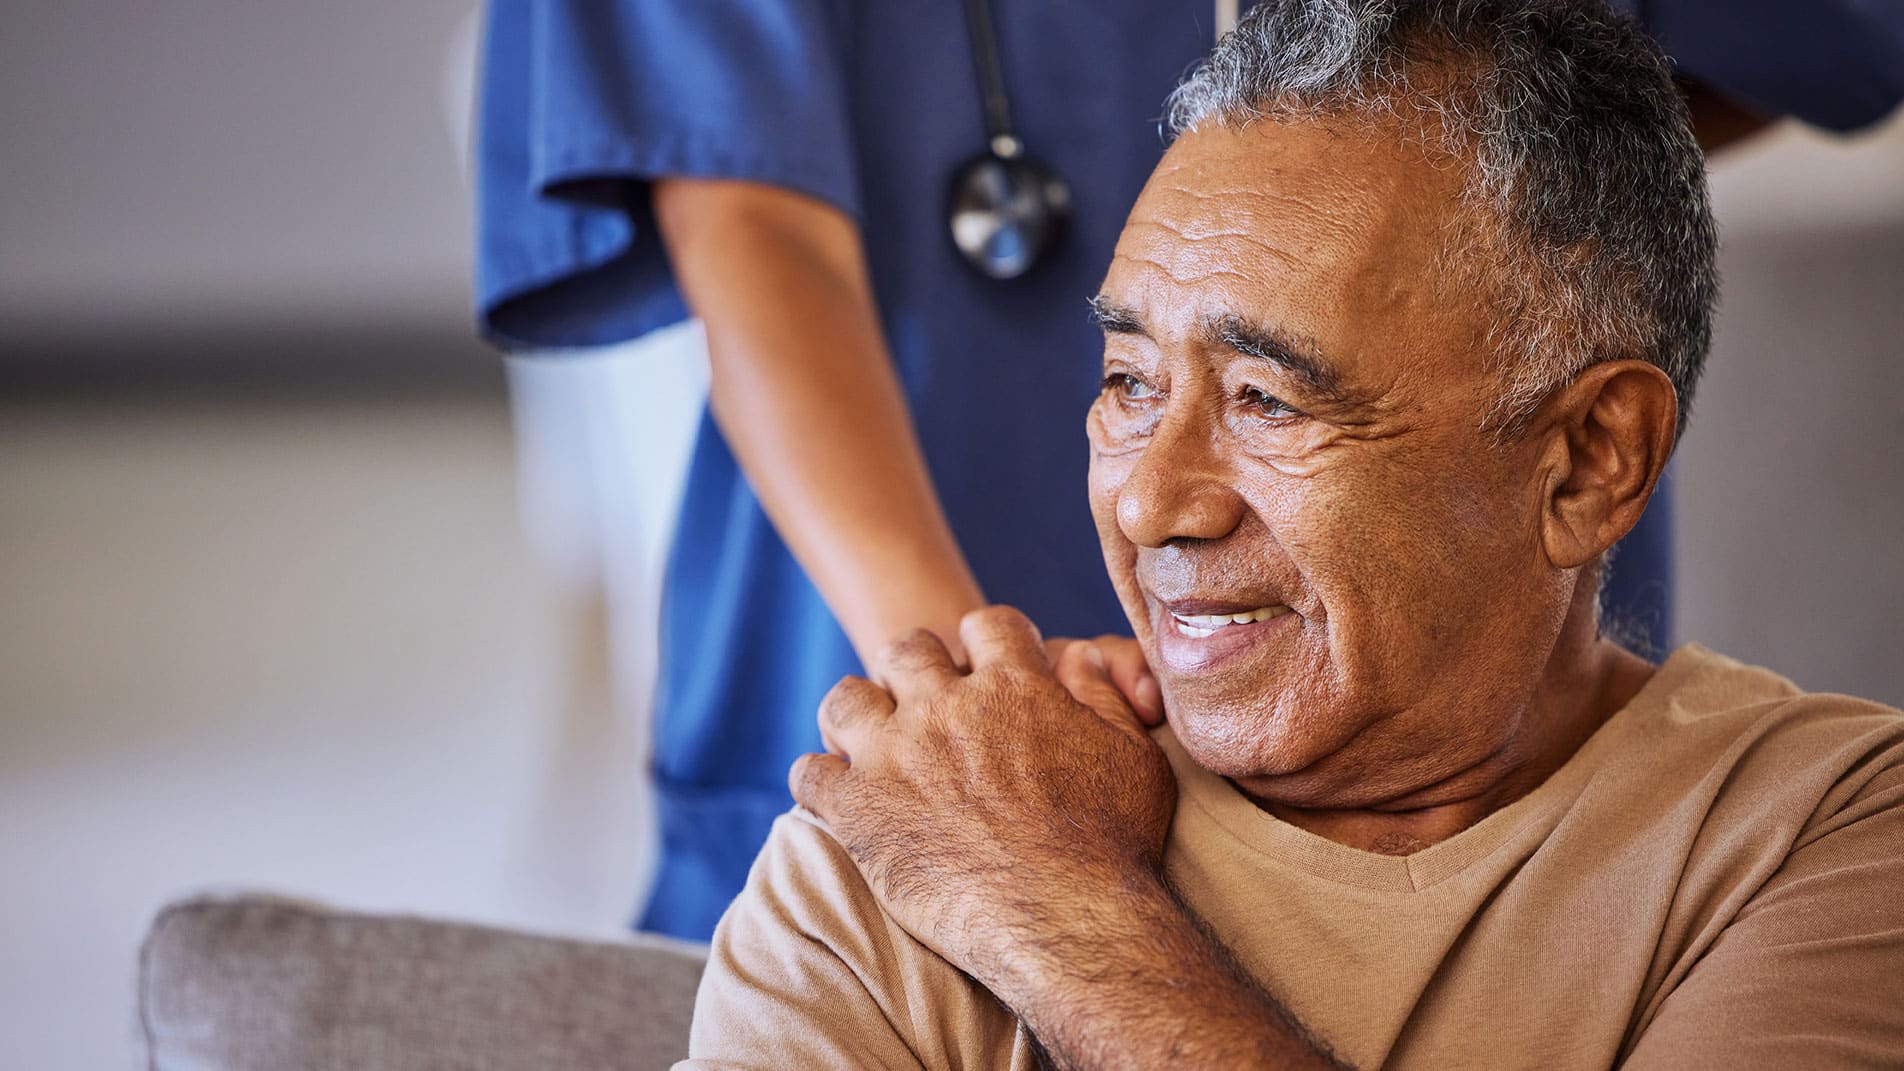 Older adult in a nursing facility being helped by a nurse